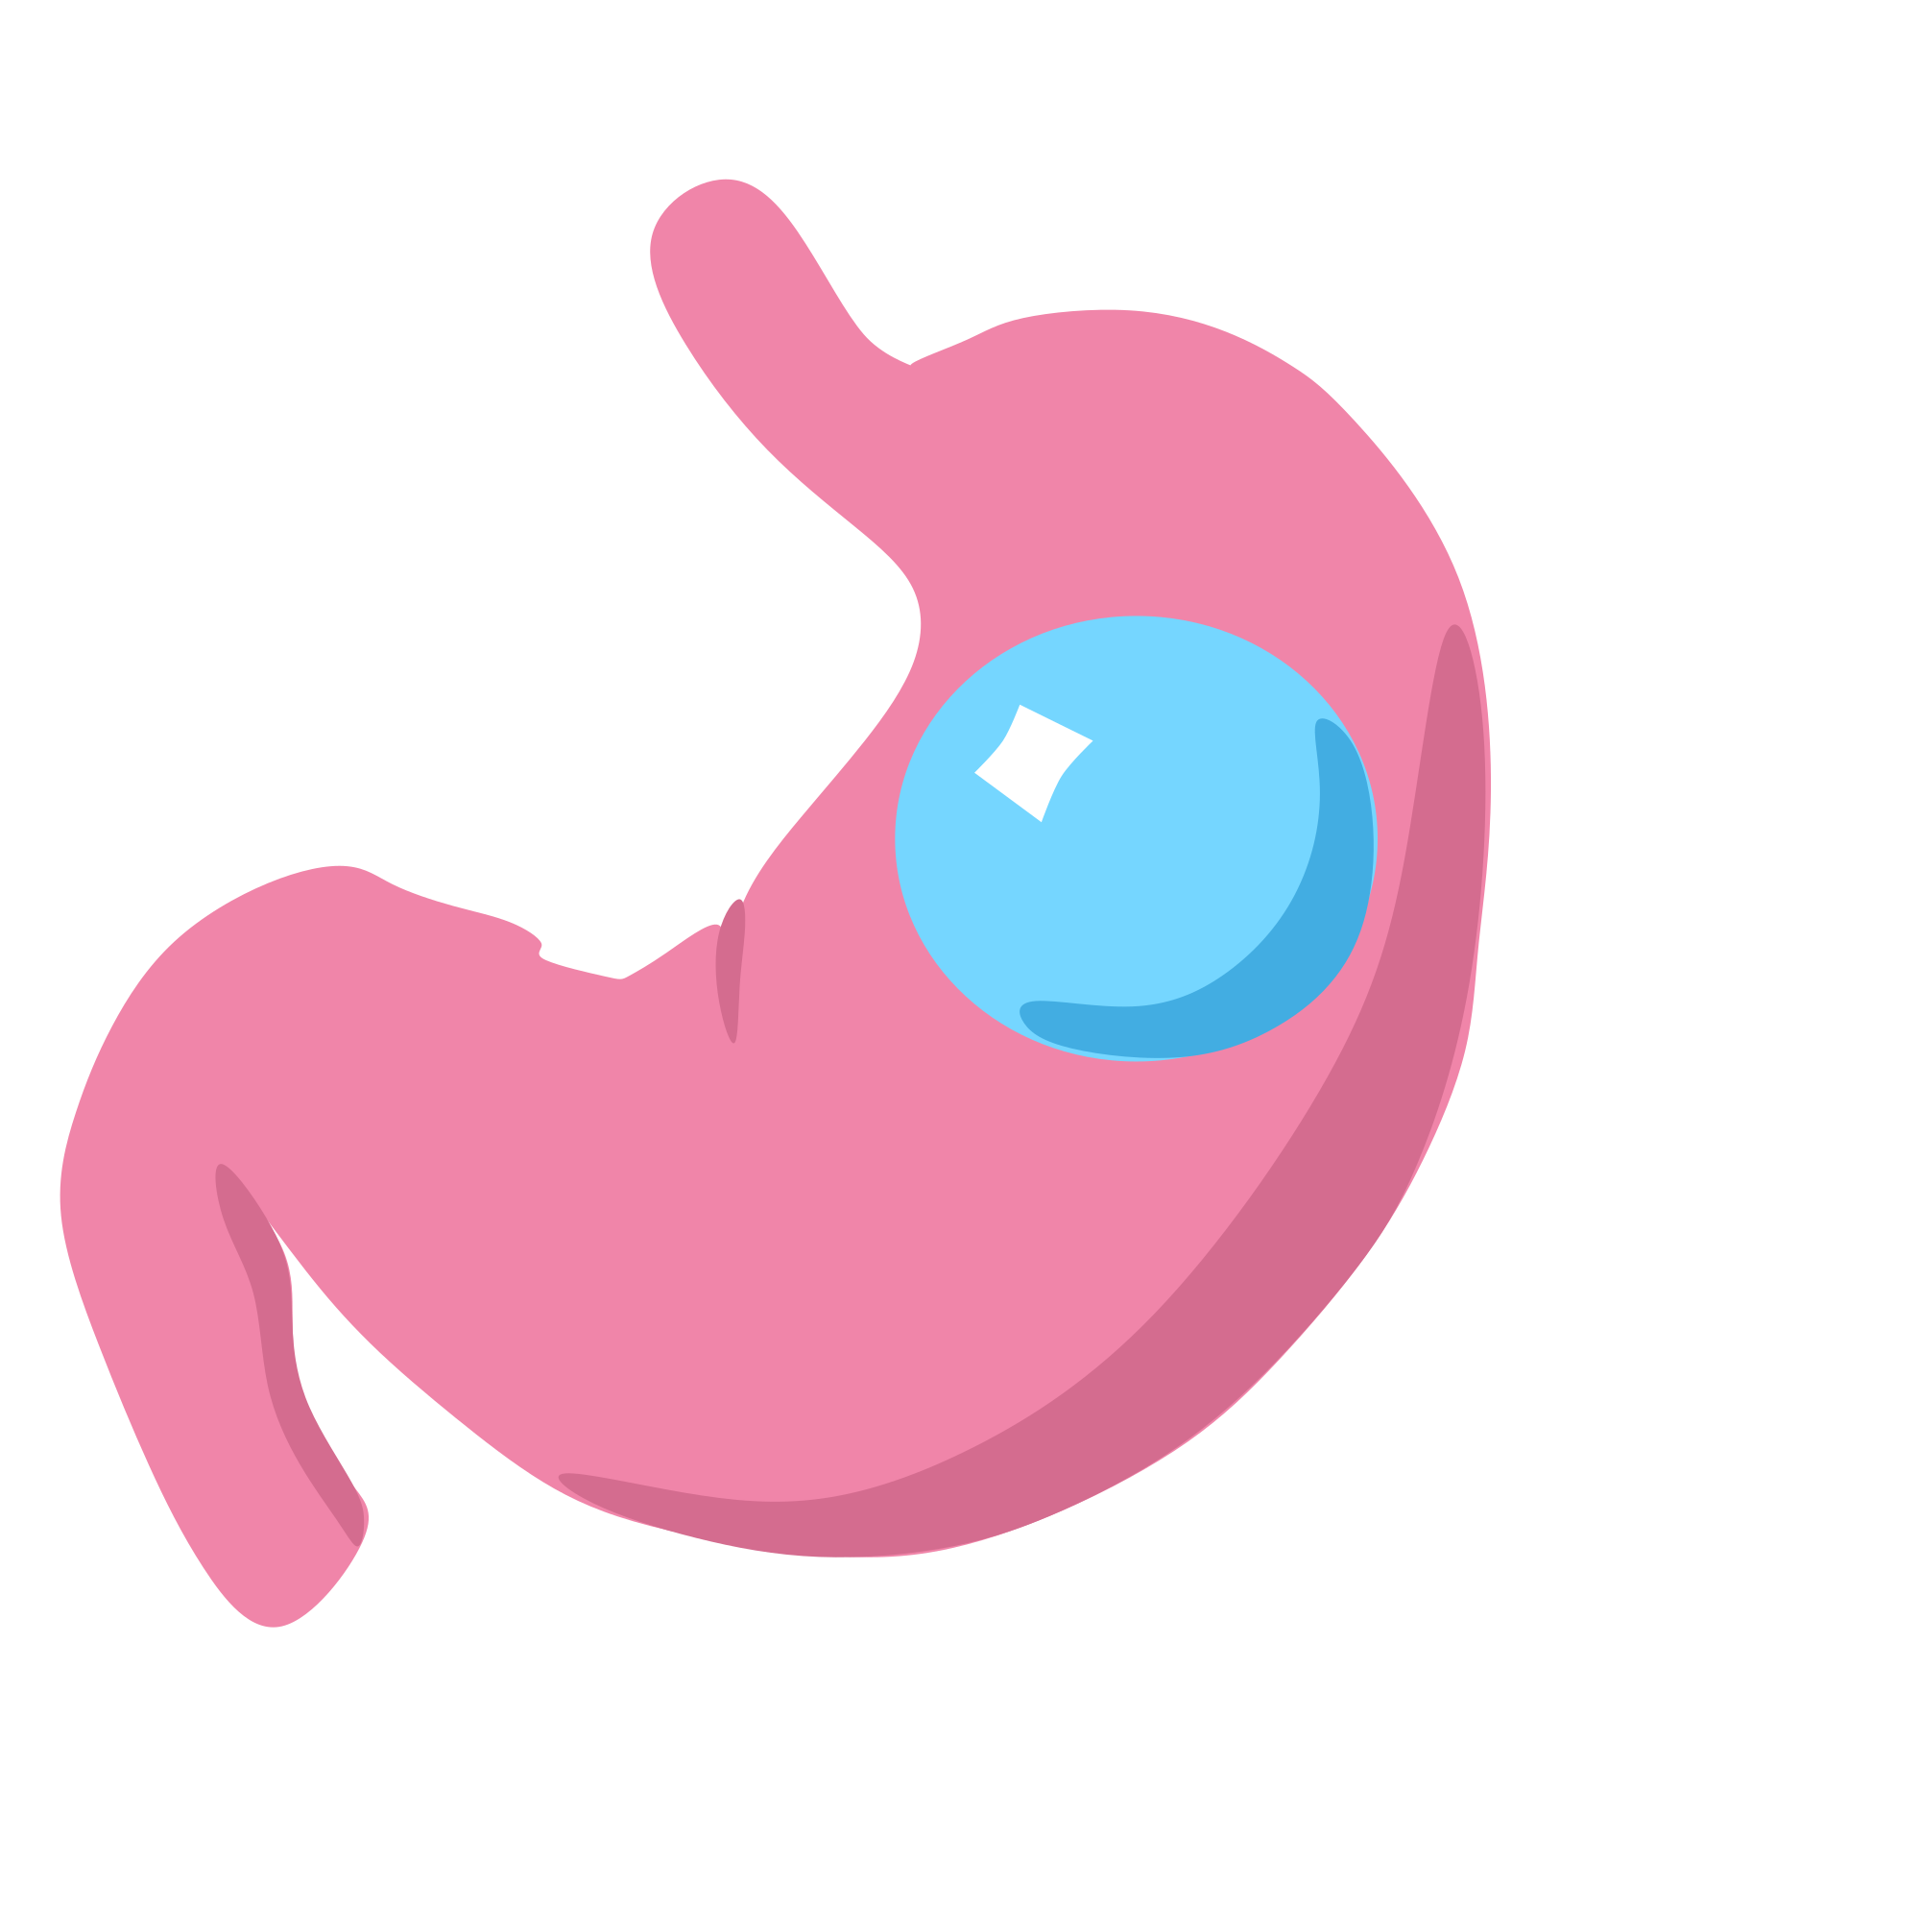 Weight clipart heavy object. Gastric balloon wikipedia iconsvg